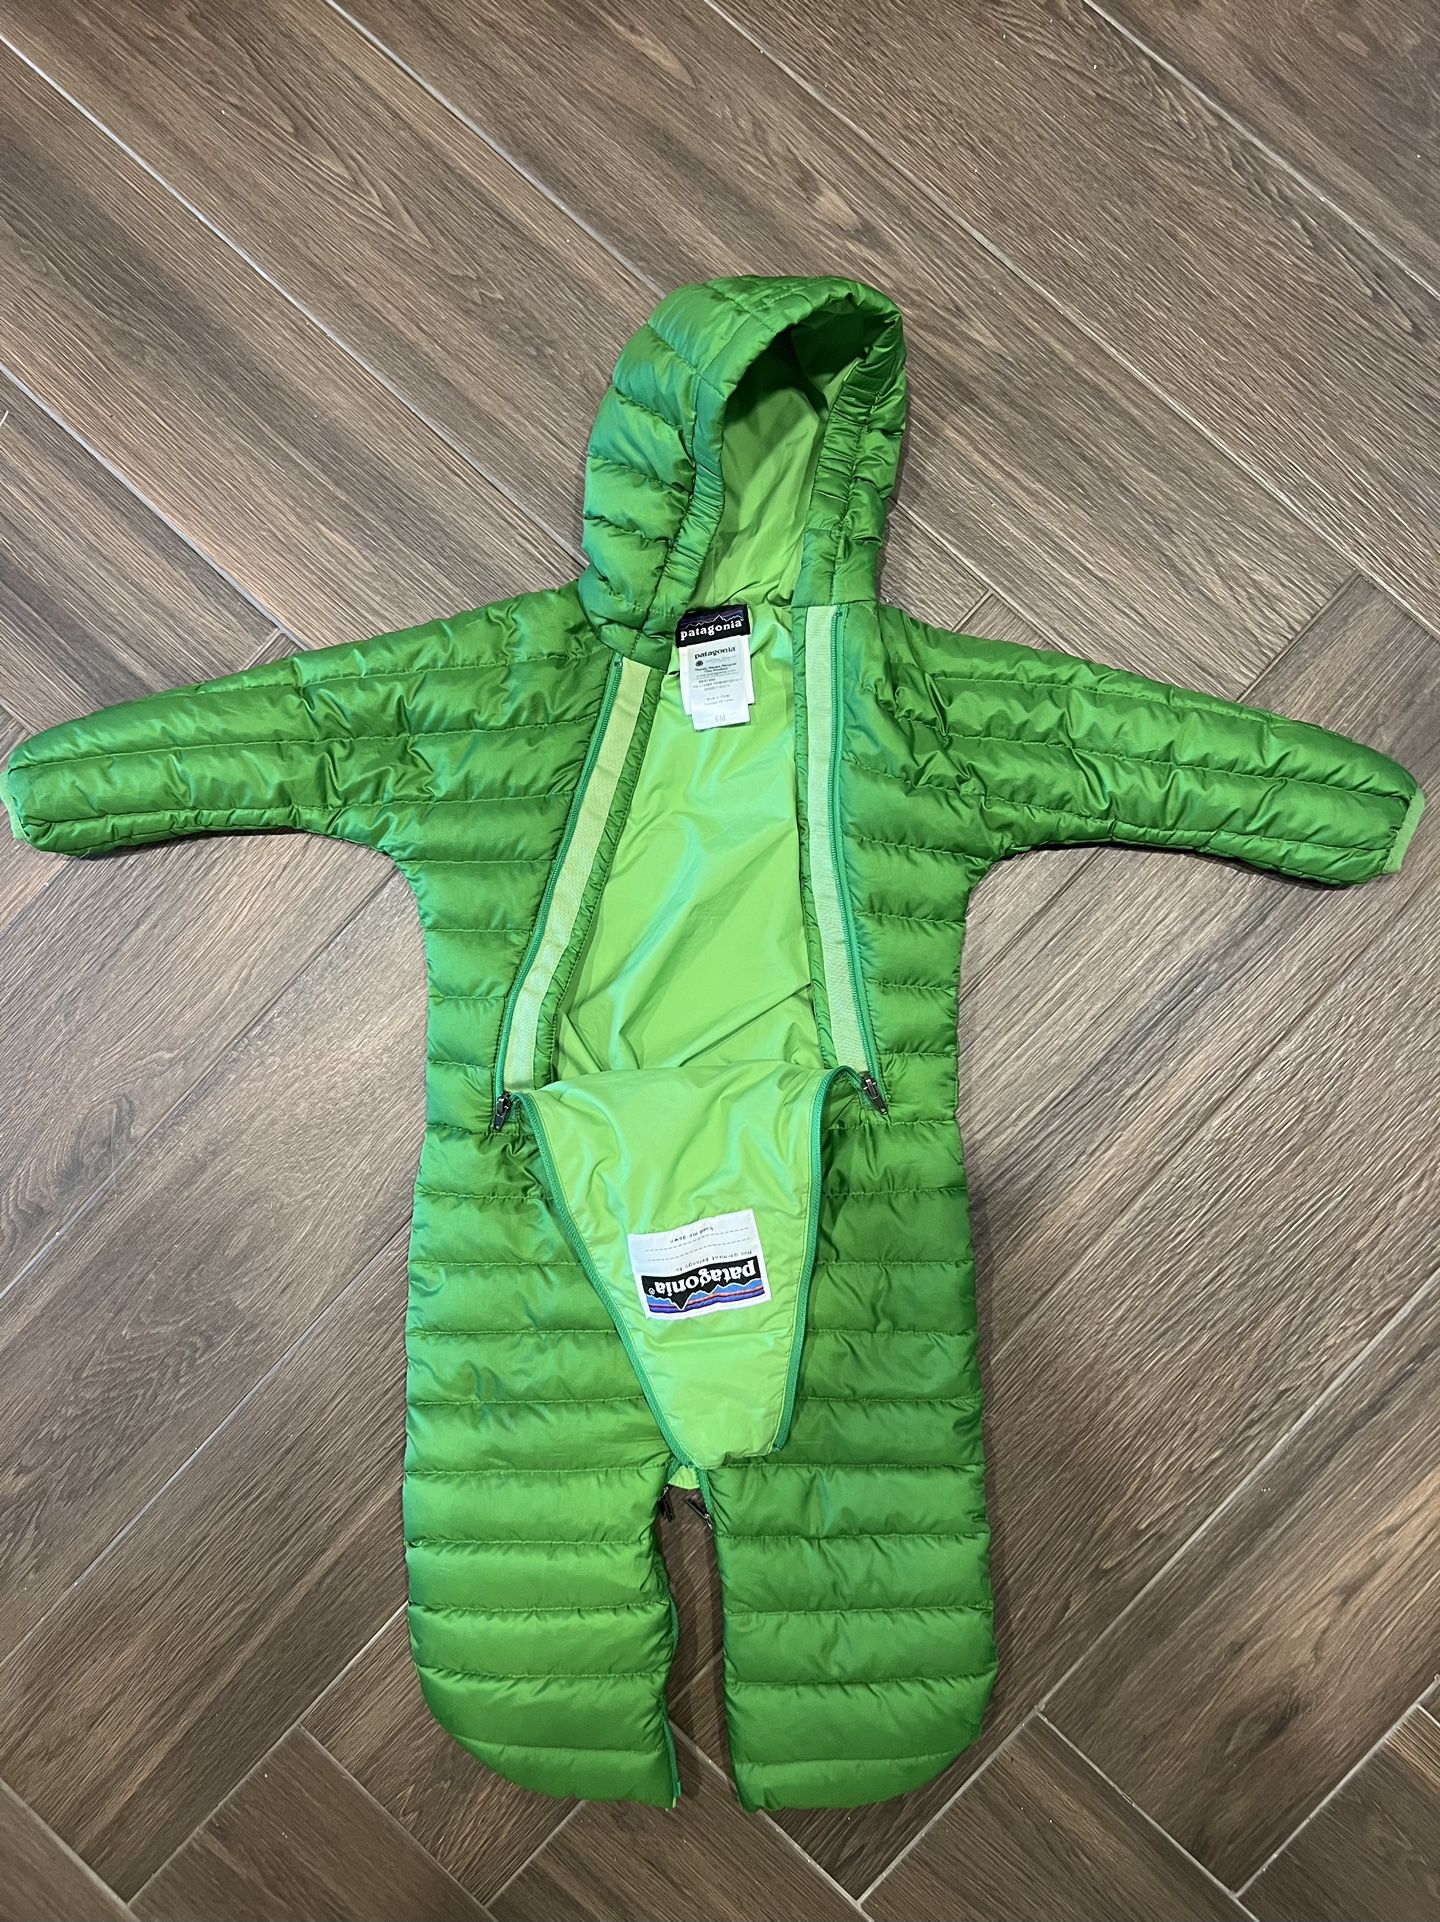 Patagonia Infant Snow Suit (Size: 6 Month)